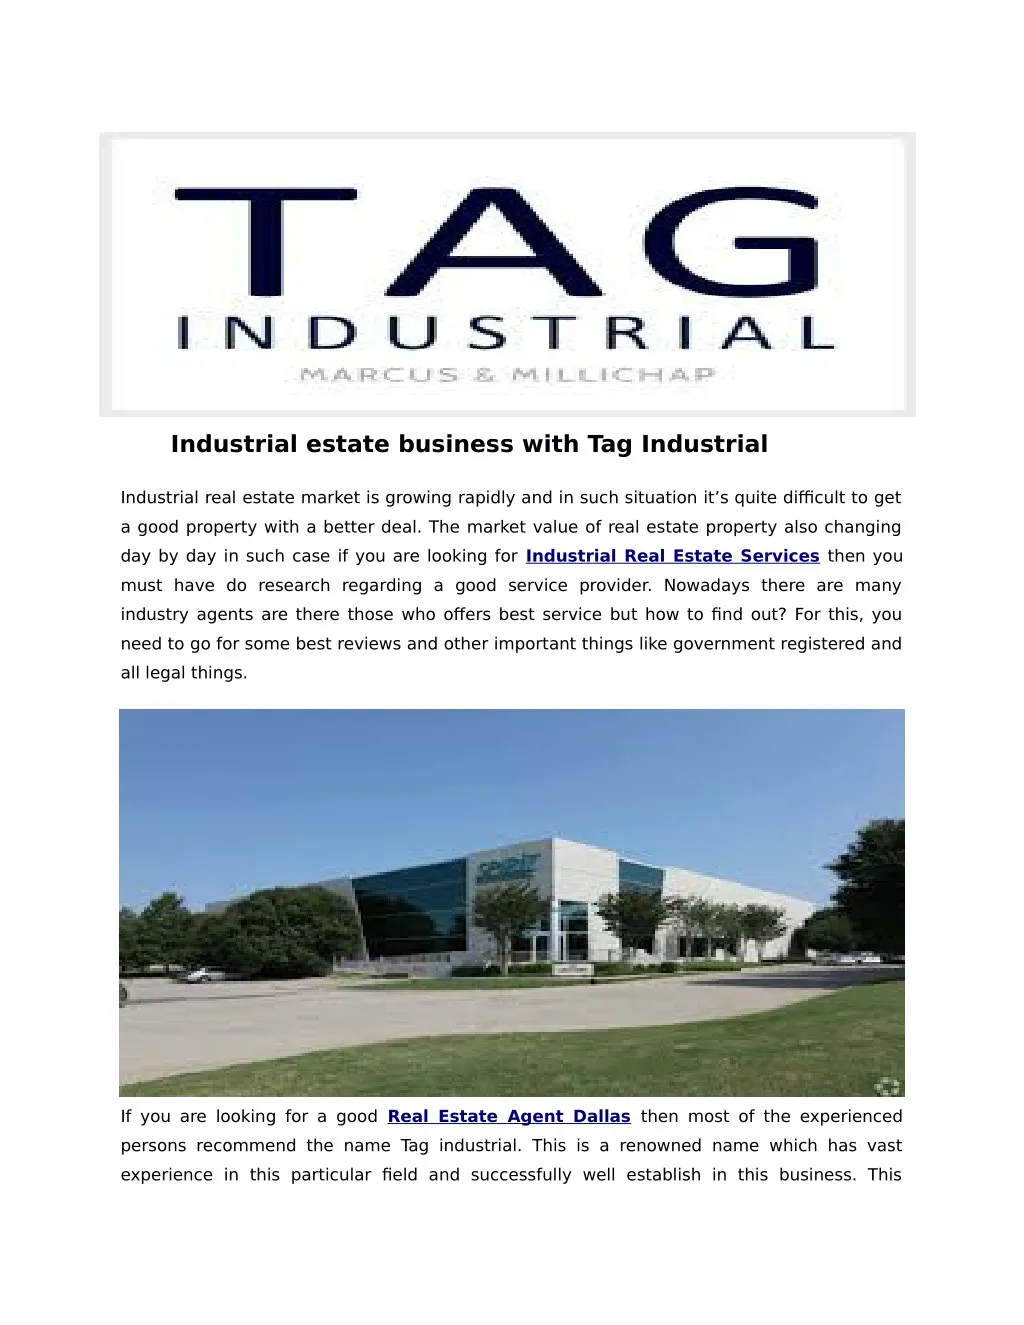 industrial estate business with tag industrial